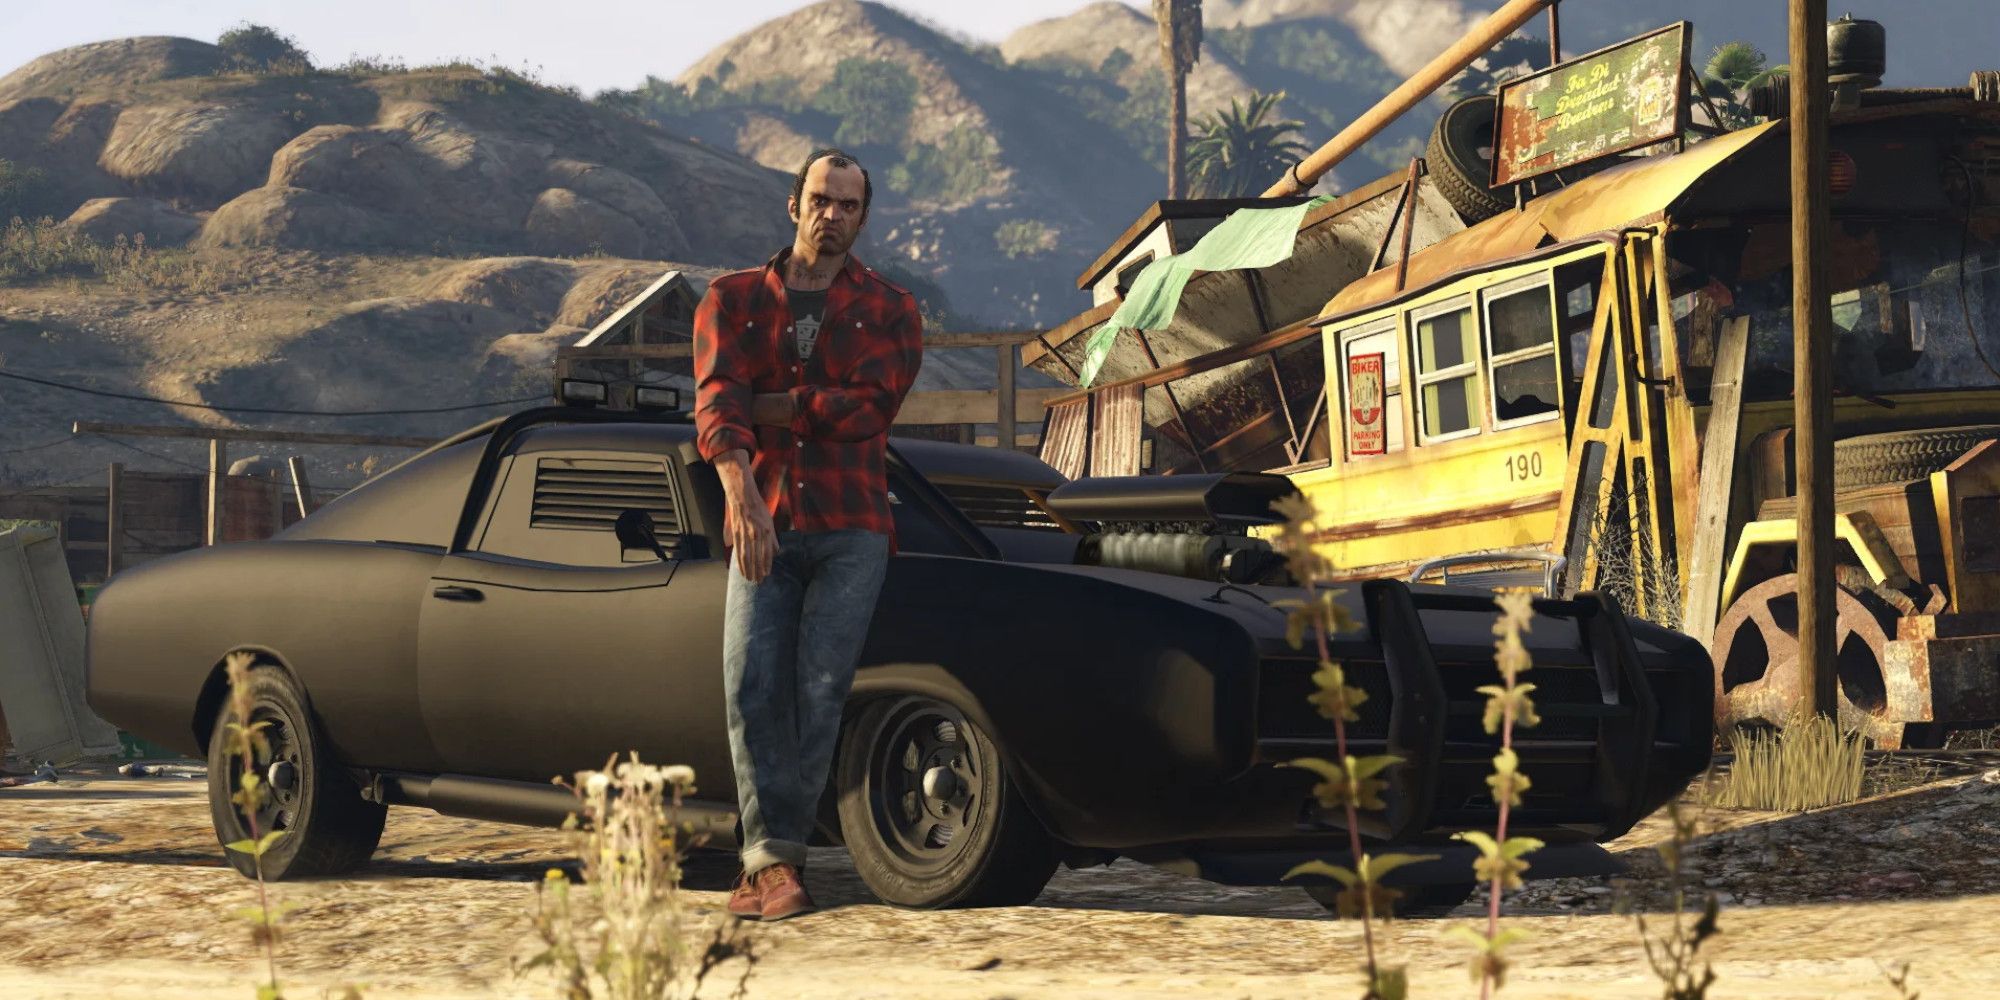 A GTA V character leans against an armored muscle car